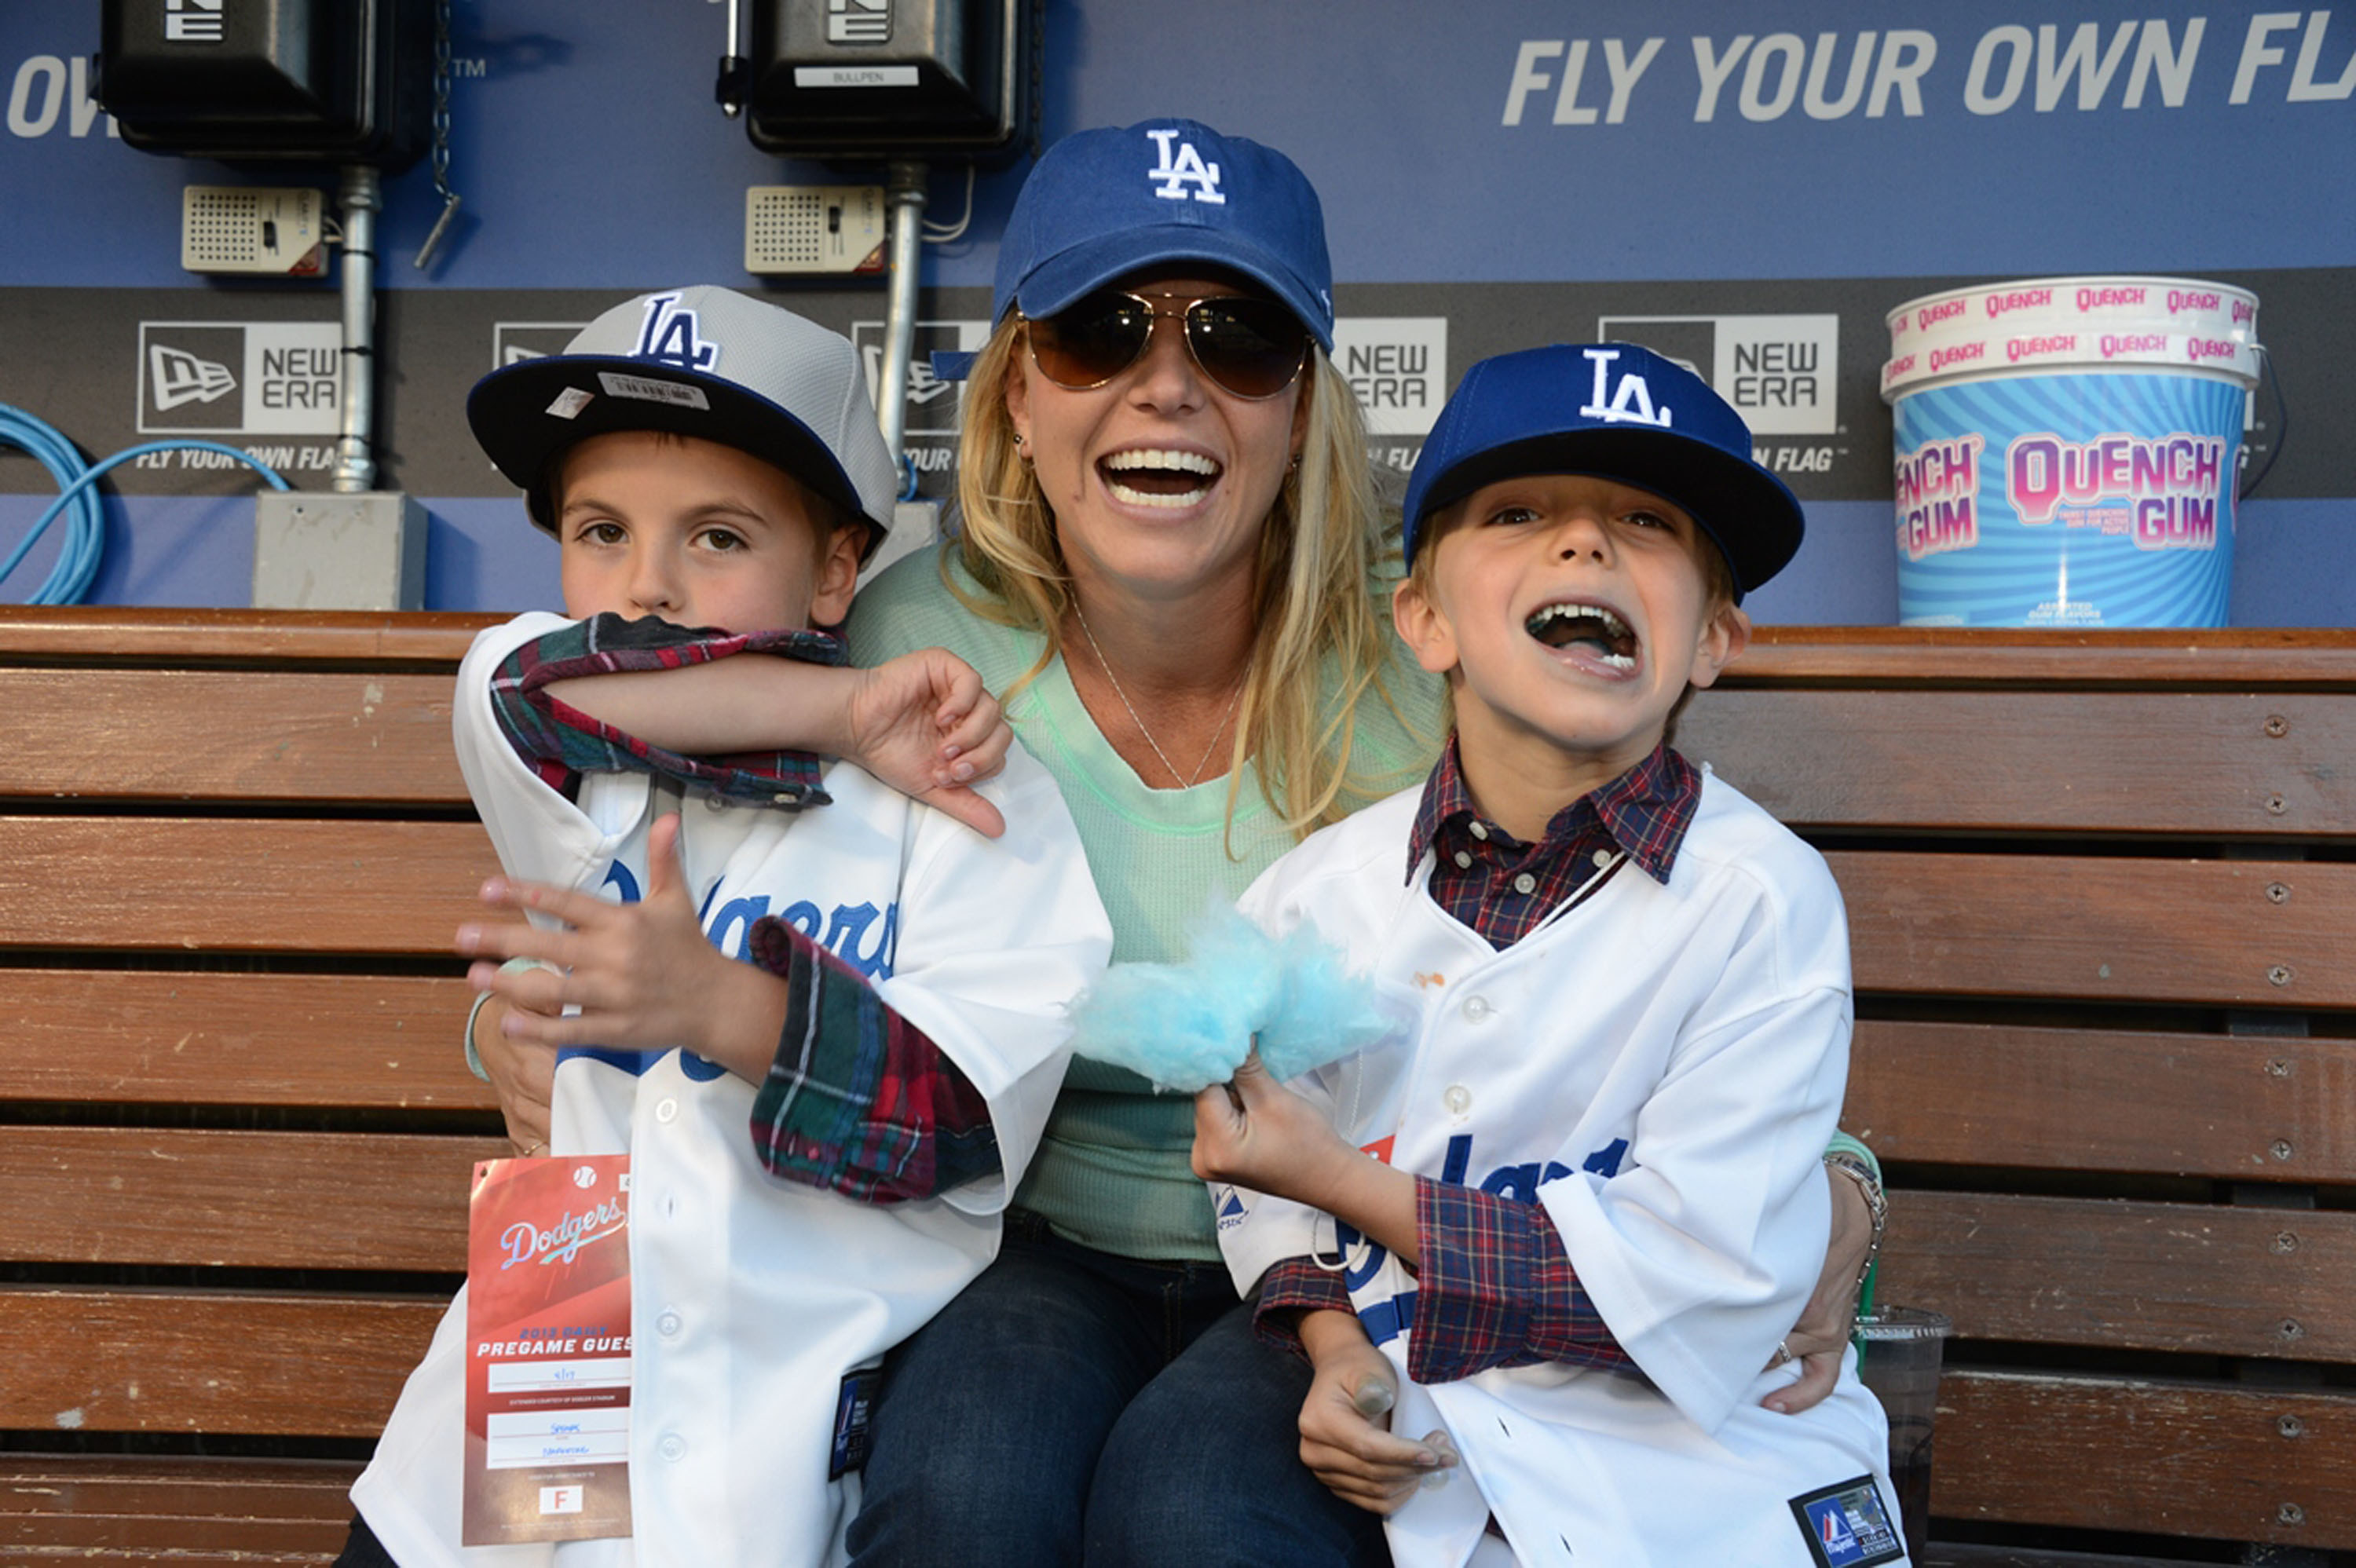 Britney with her two sons as young boys, who are in baseball uniforms